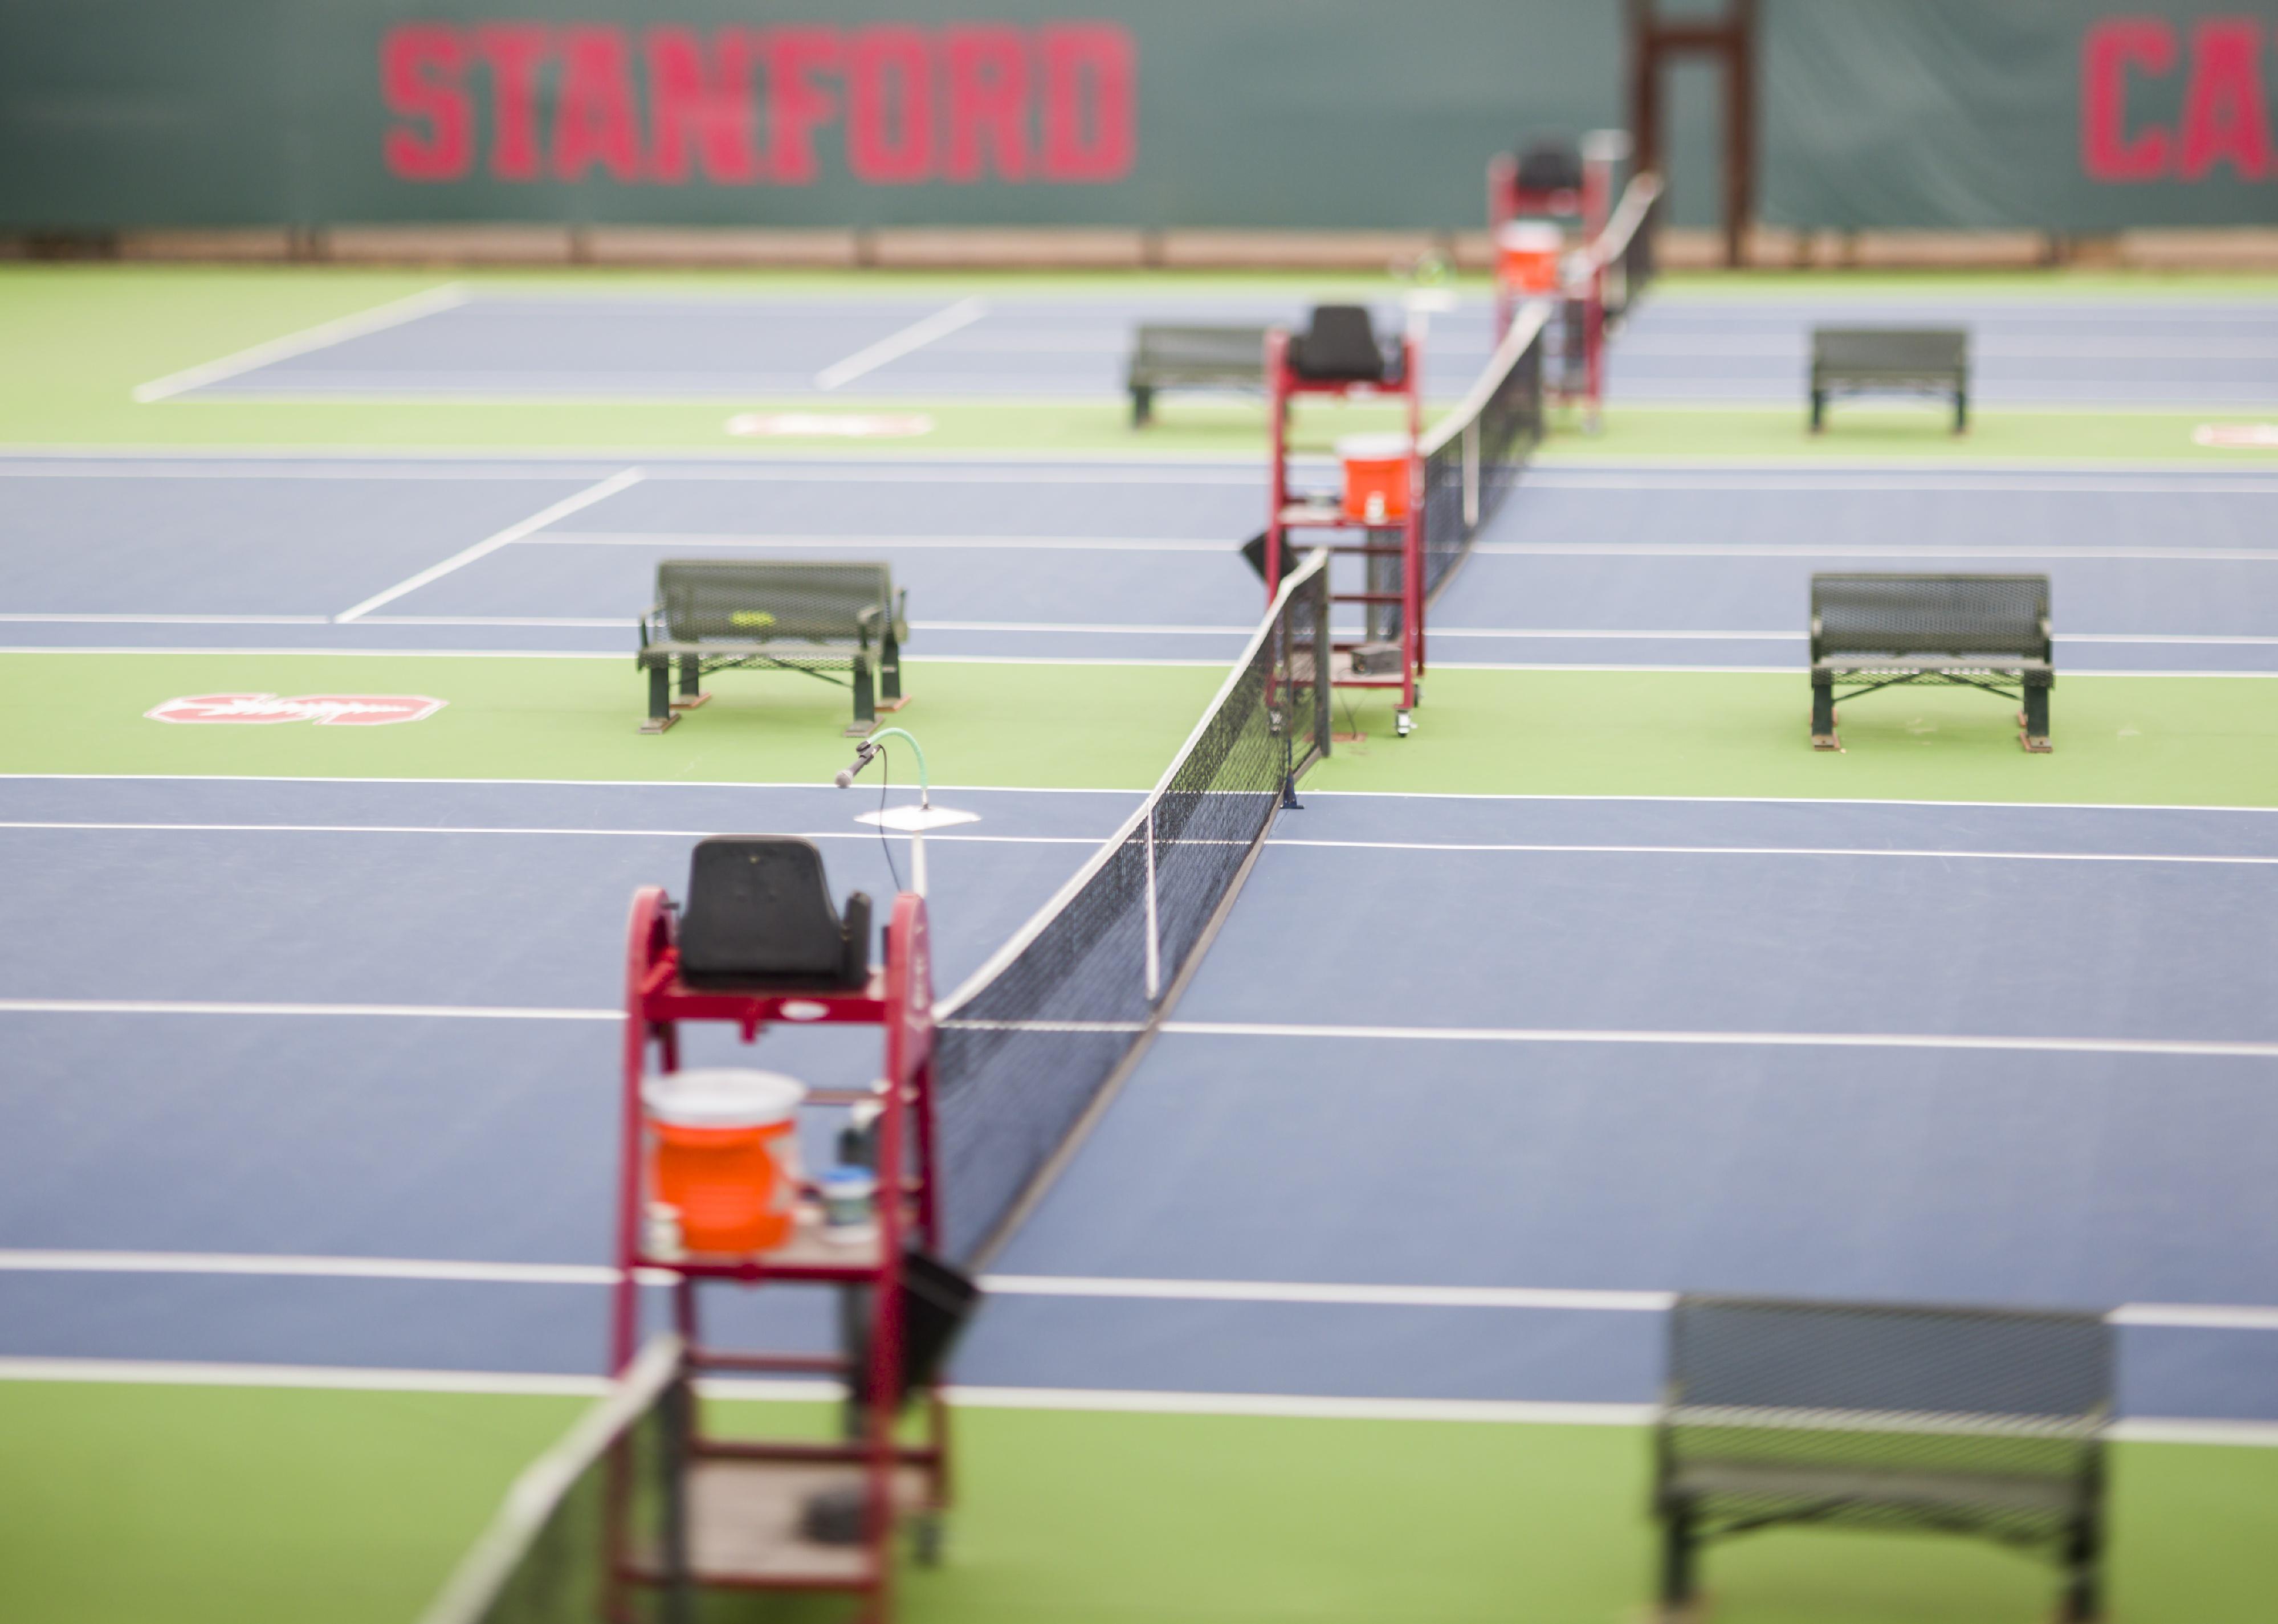 A general view of the courts before an NCAA Women's Tennis match.